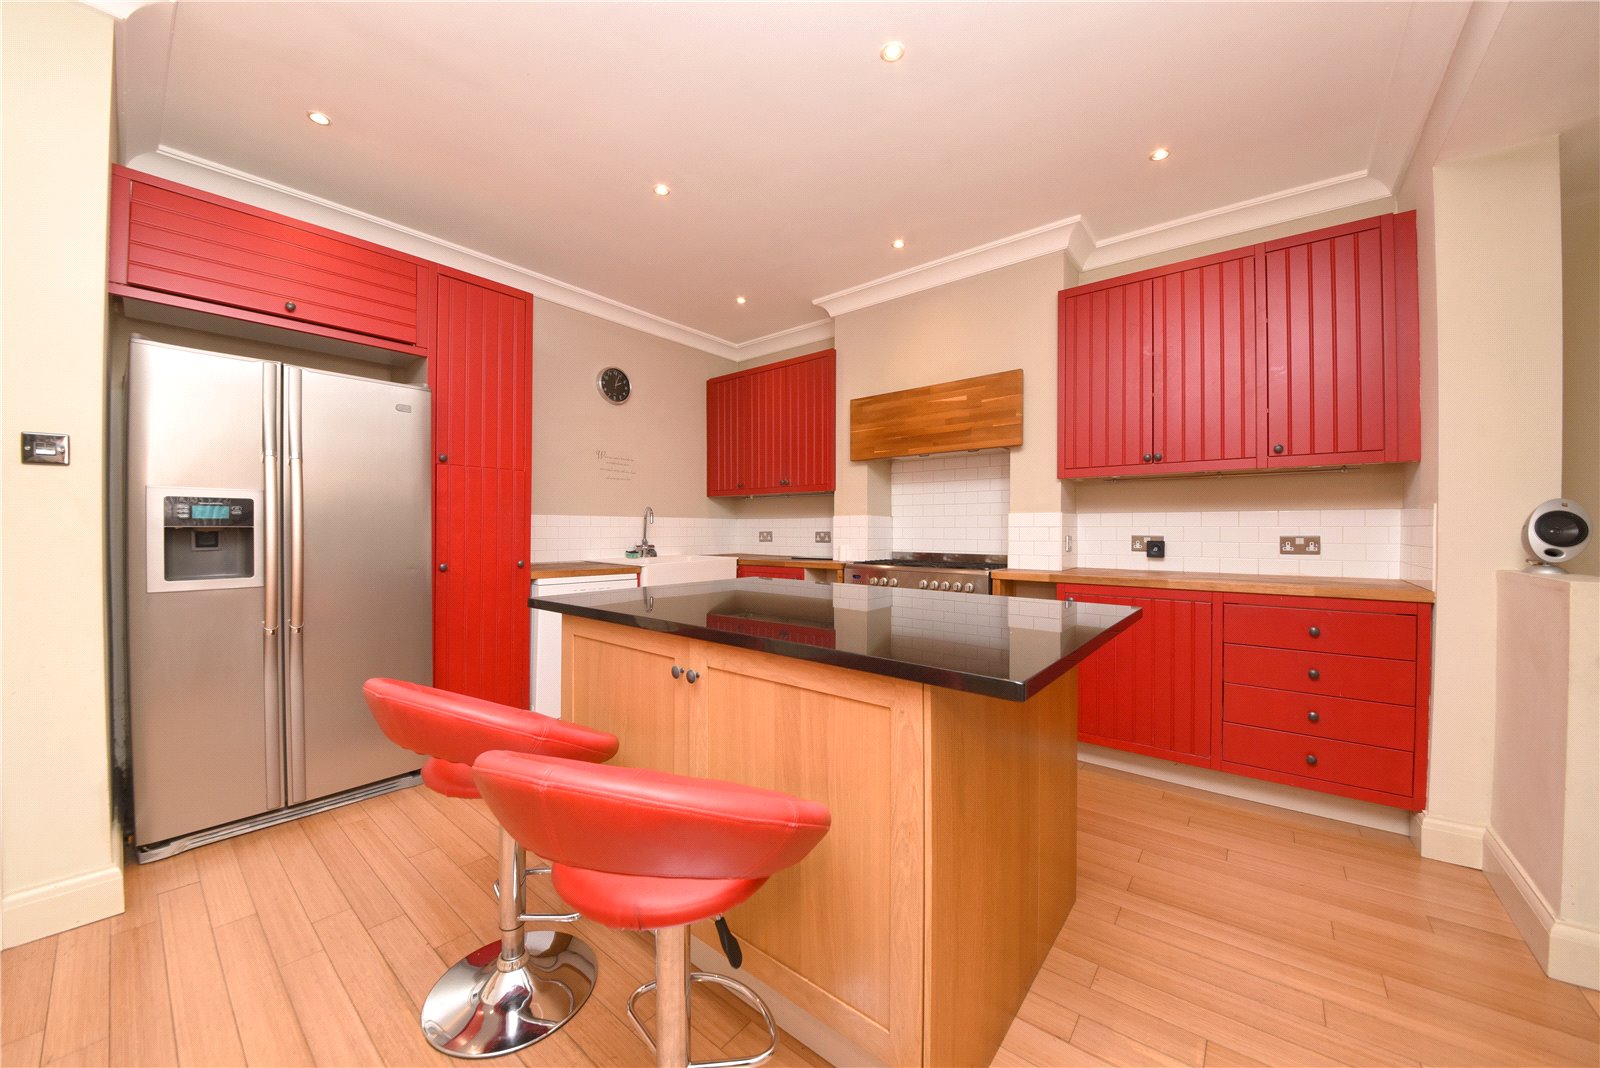 4 bed house to rent in Longland Drive, Totteridge - Property Image 1